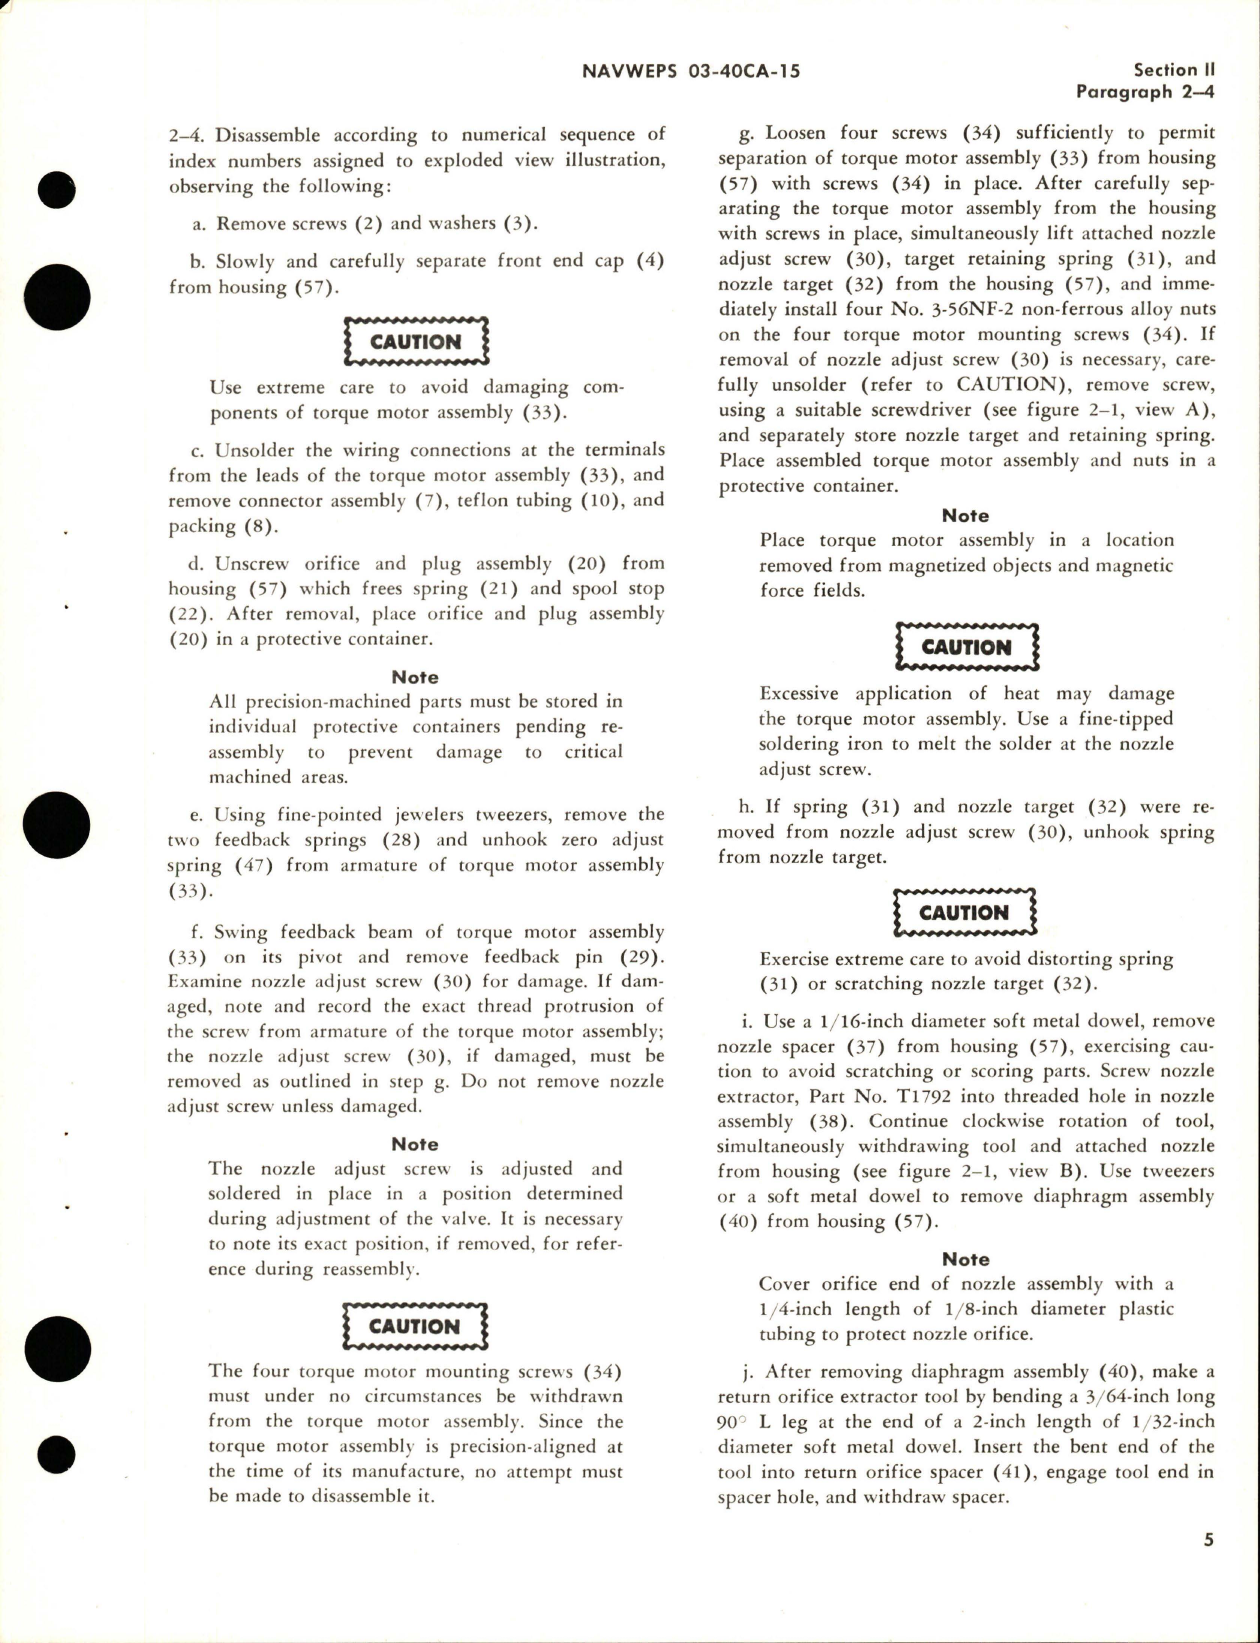 Sample page 7 from AirCorps Library document: Overhaul Instructions for Electro-Hydraulic Flow Control Servo Valve - Part FC11-148A 